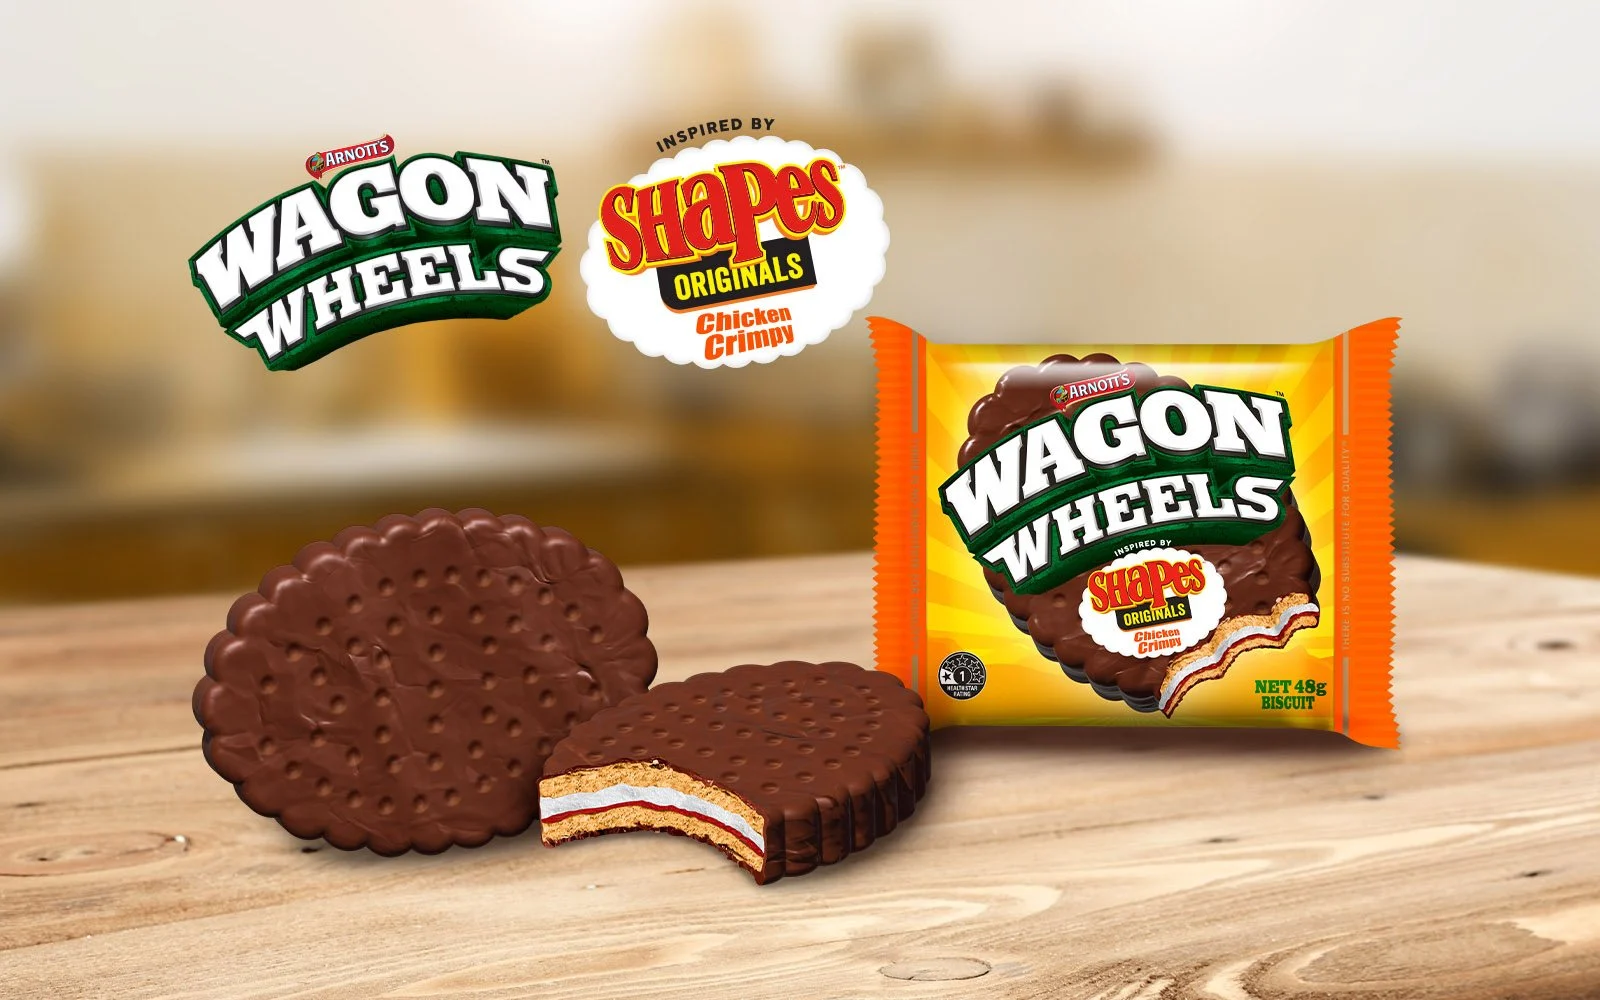 Hero Image Recipe Article - Arnott's Wagon Wheels Inspired by Chicken Crimpy Shapes